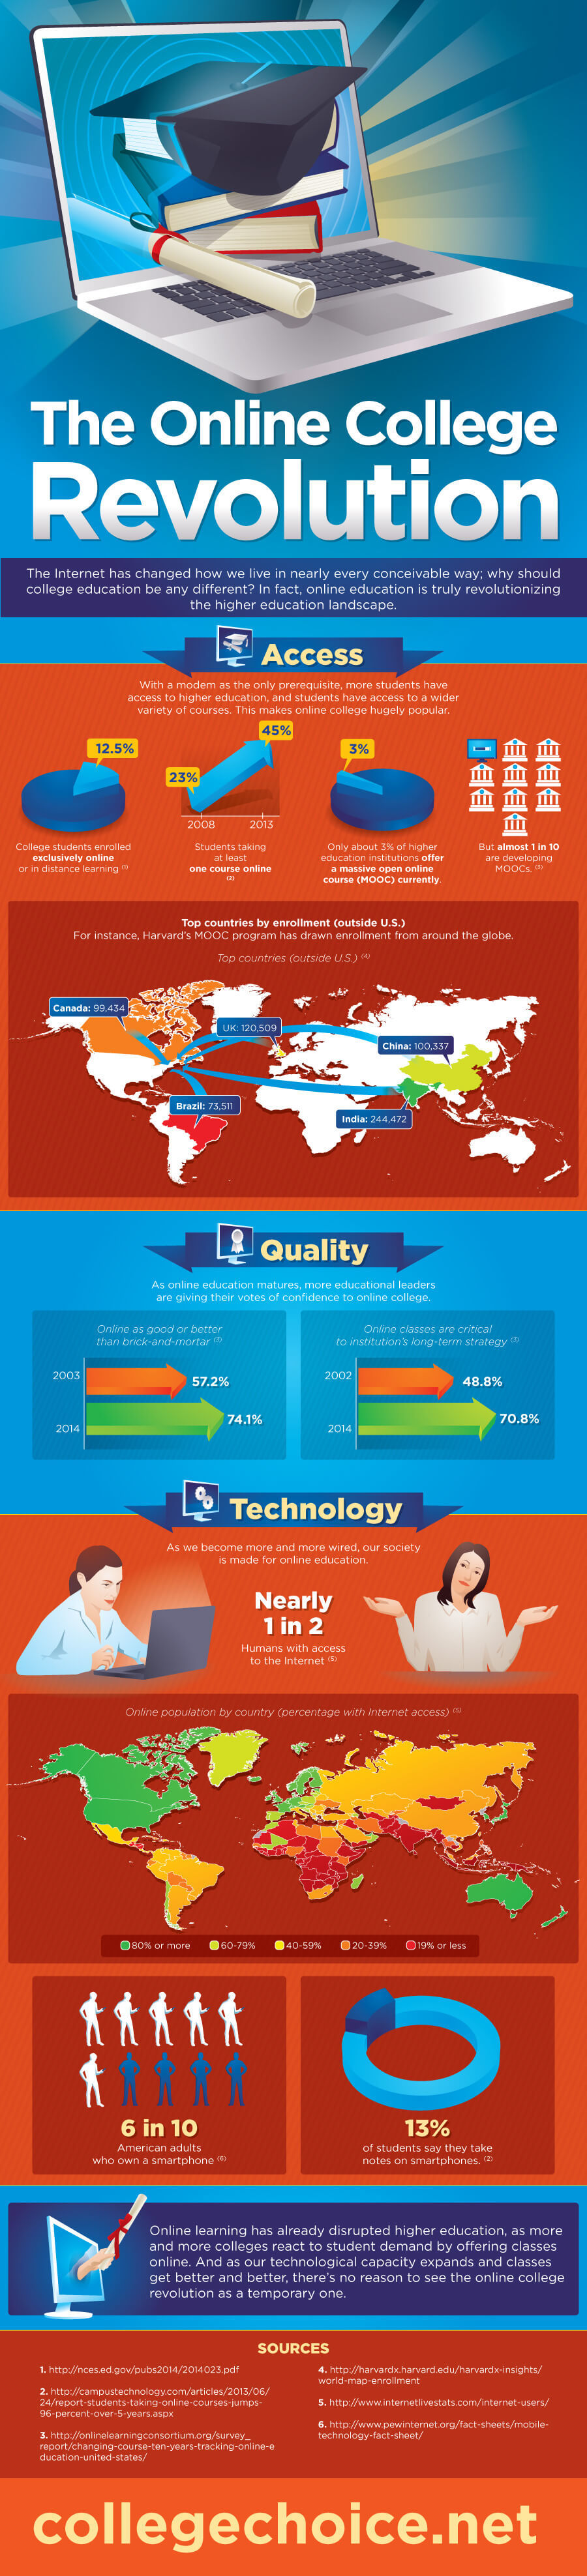 The Online College Revolution Infographic